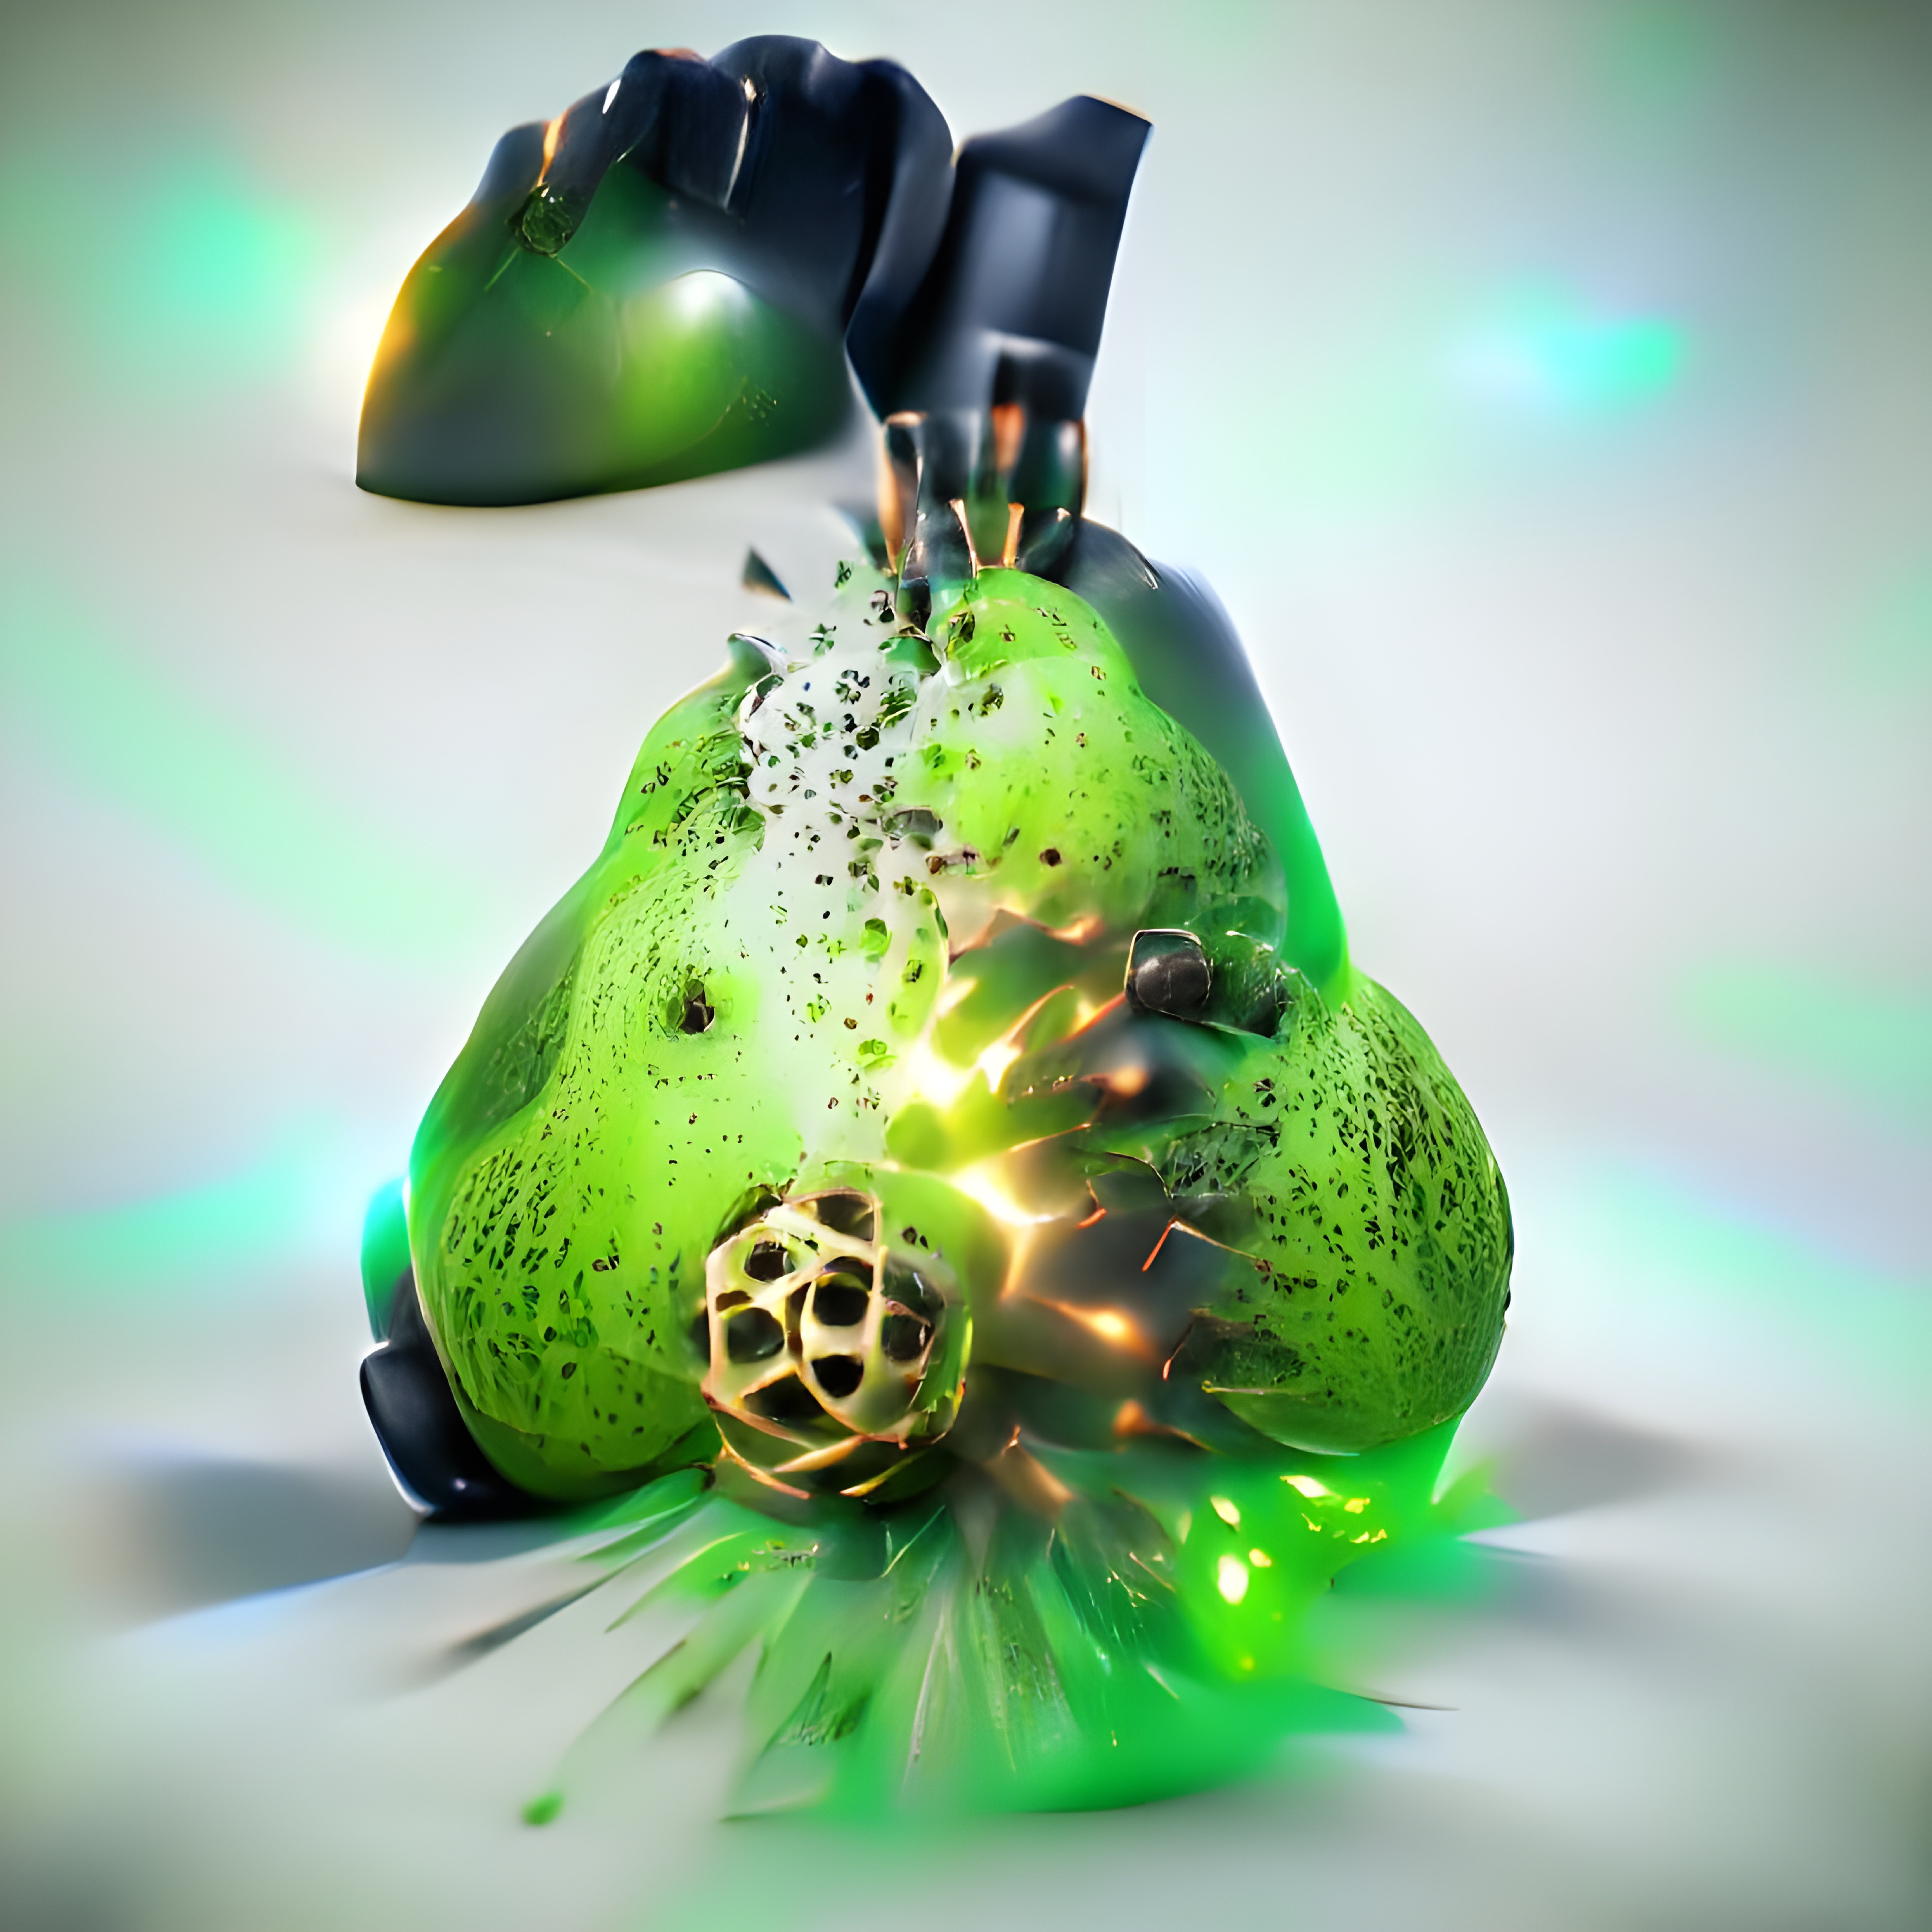 Pear Naded